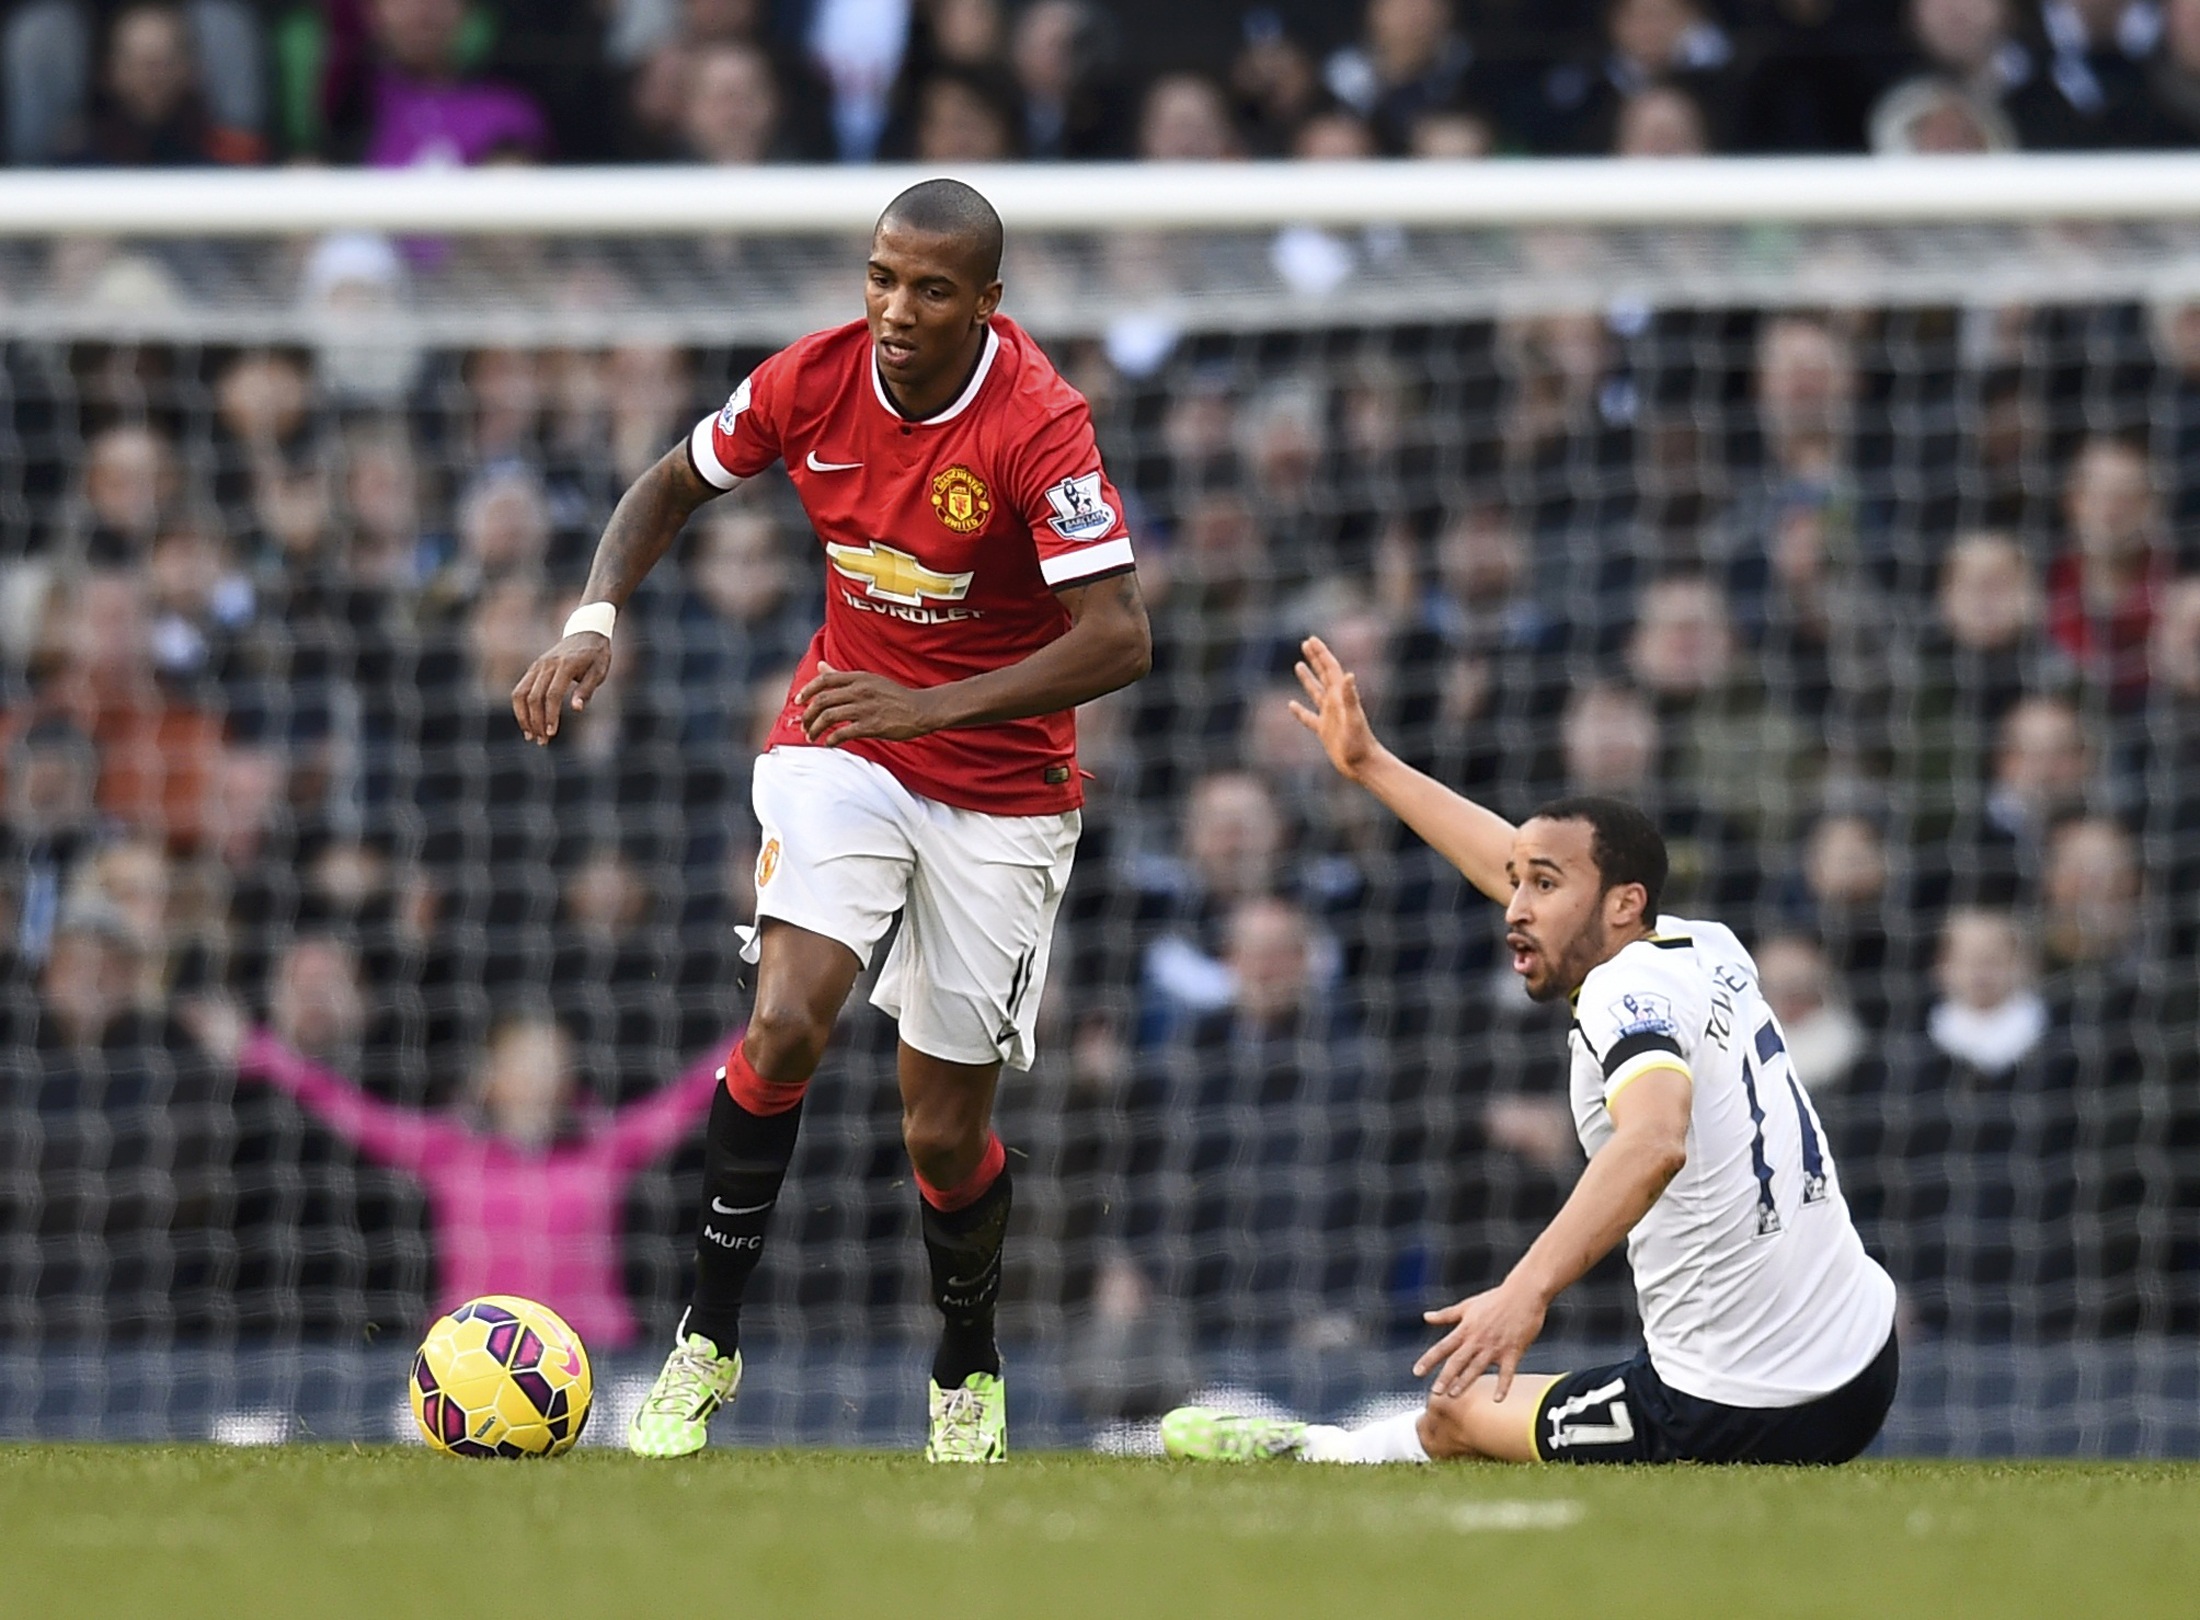 Manchester United's Ashley Young runs past Tottenham Hotspur's Andros Townsend during their English Premier League soccer match at White Hart Lane in London